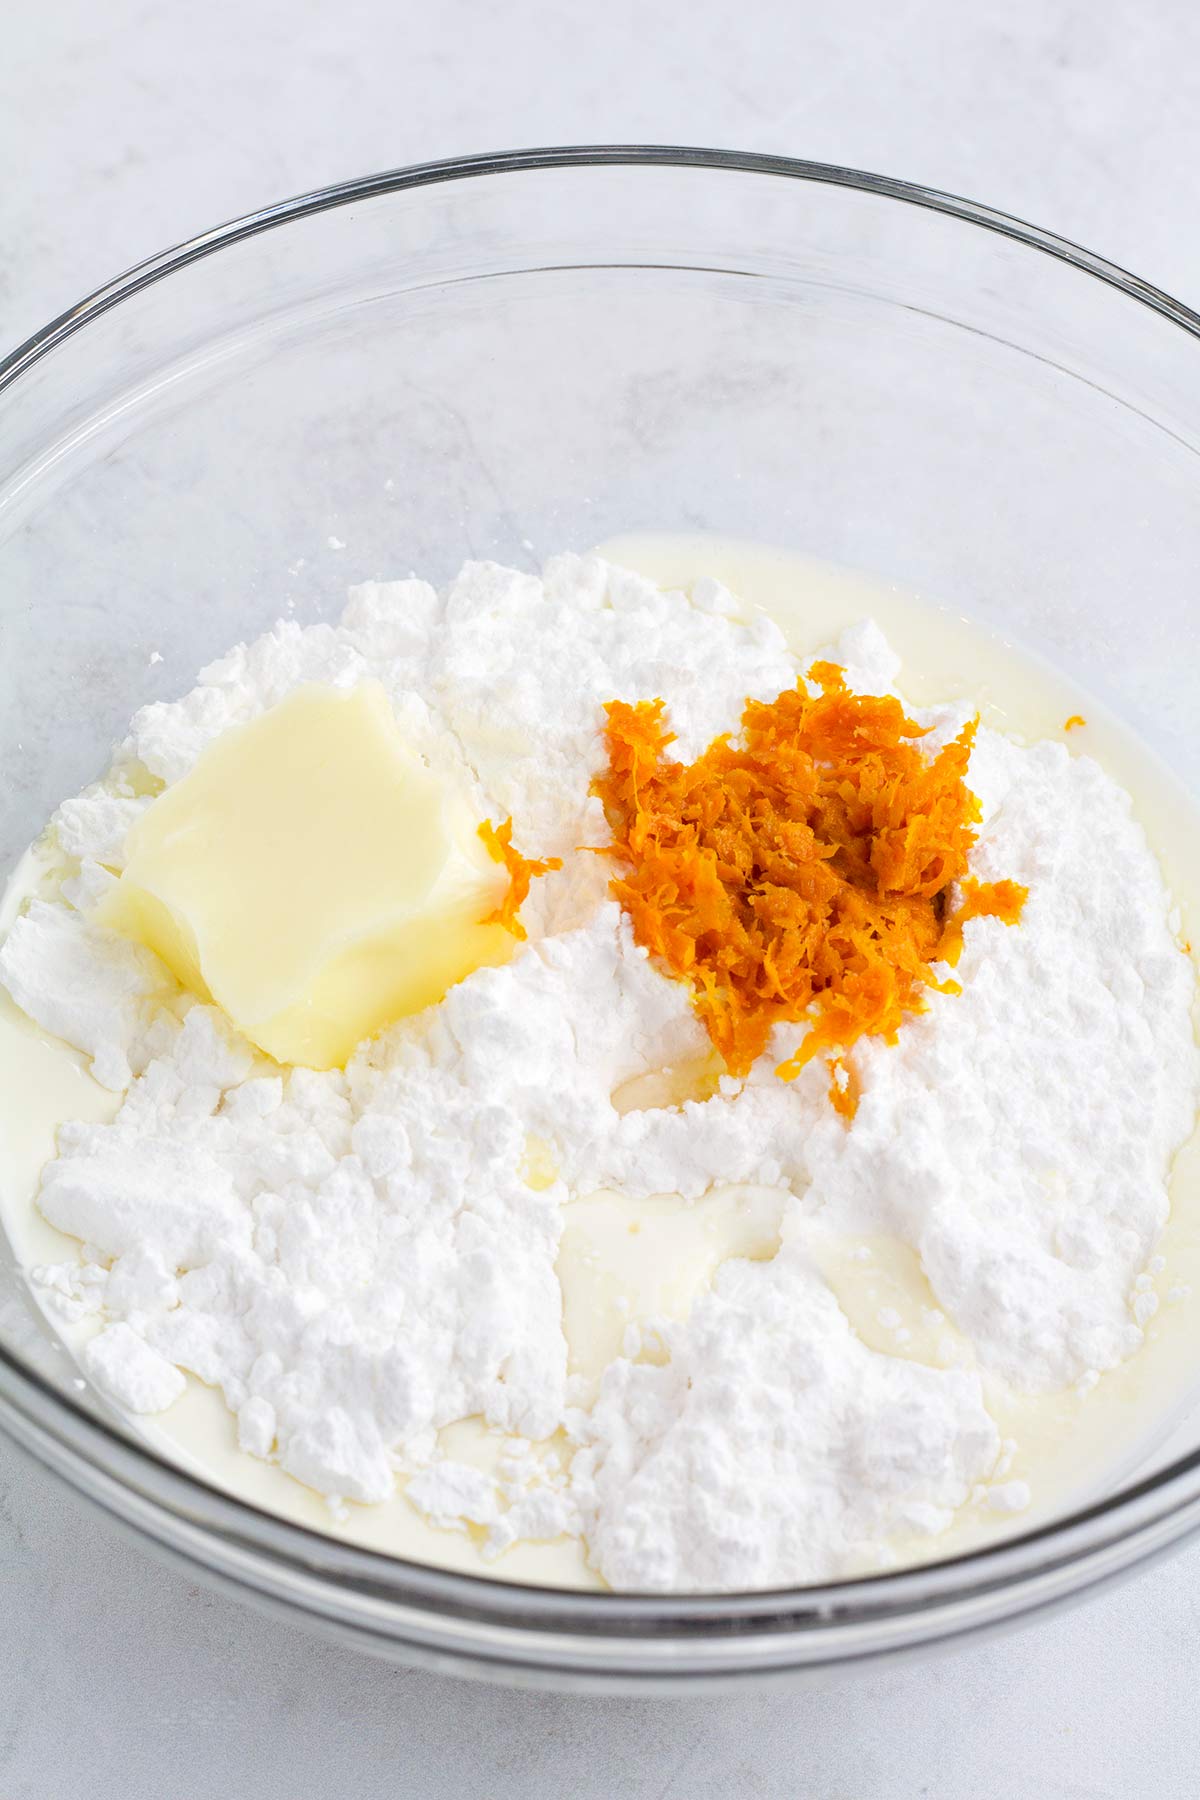 Glass bowl with powdered sugar, orange zest, and cream unmixed and a whisk resting in the bowl.